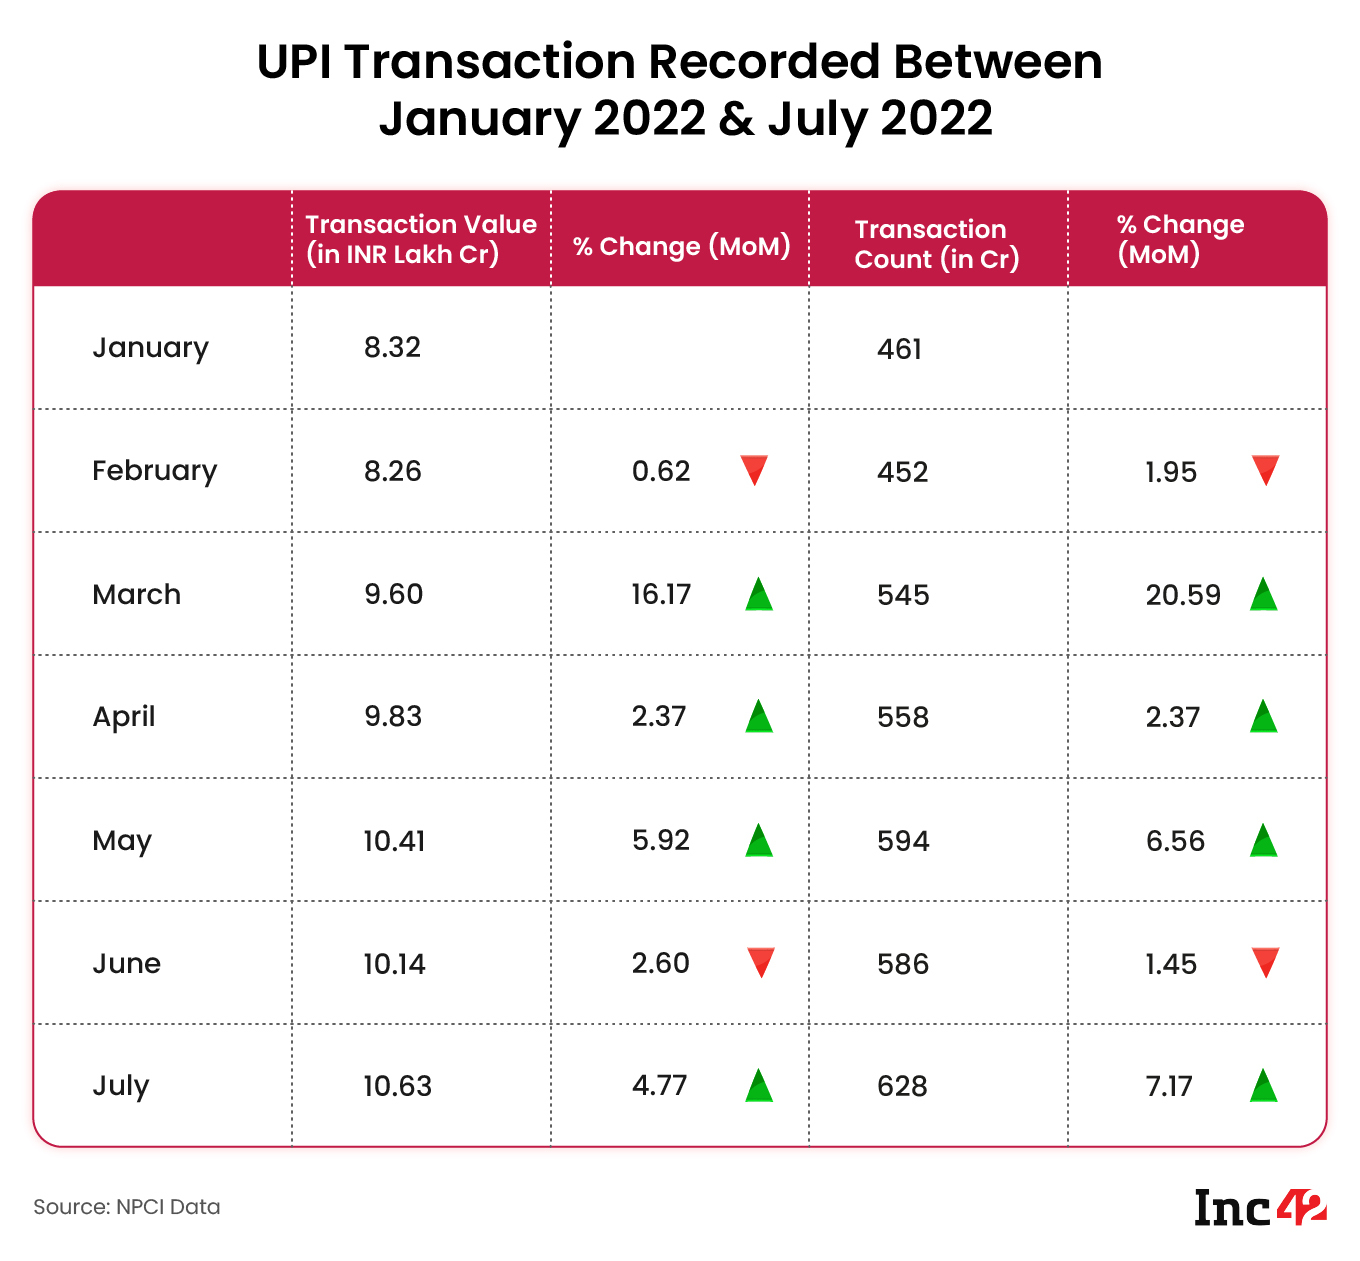 The total transaction volume in 2022 stands at INR 67.21 Lakh Cr ($850 Bn) so far.